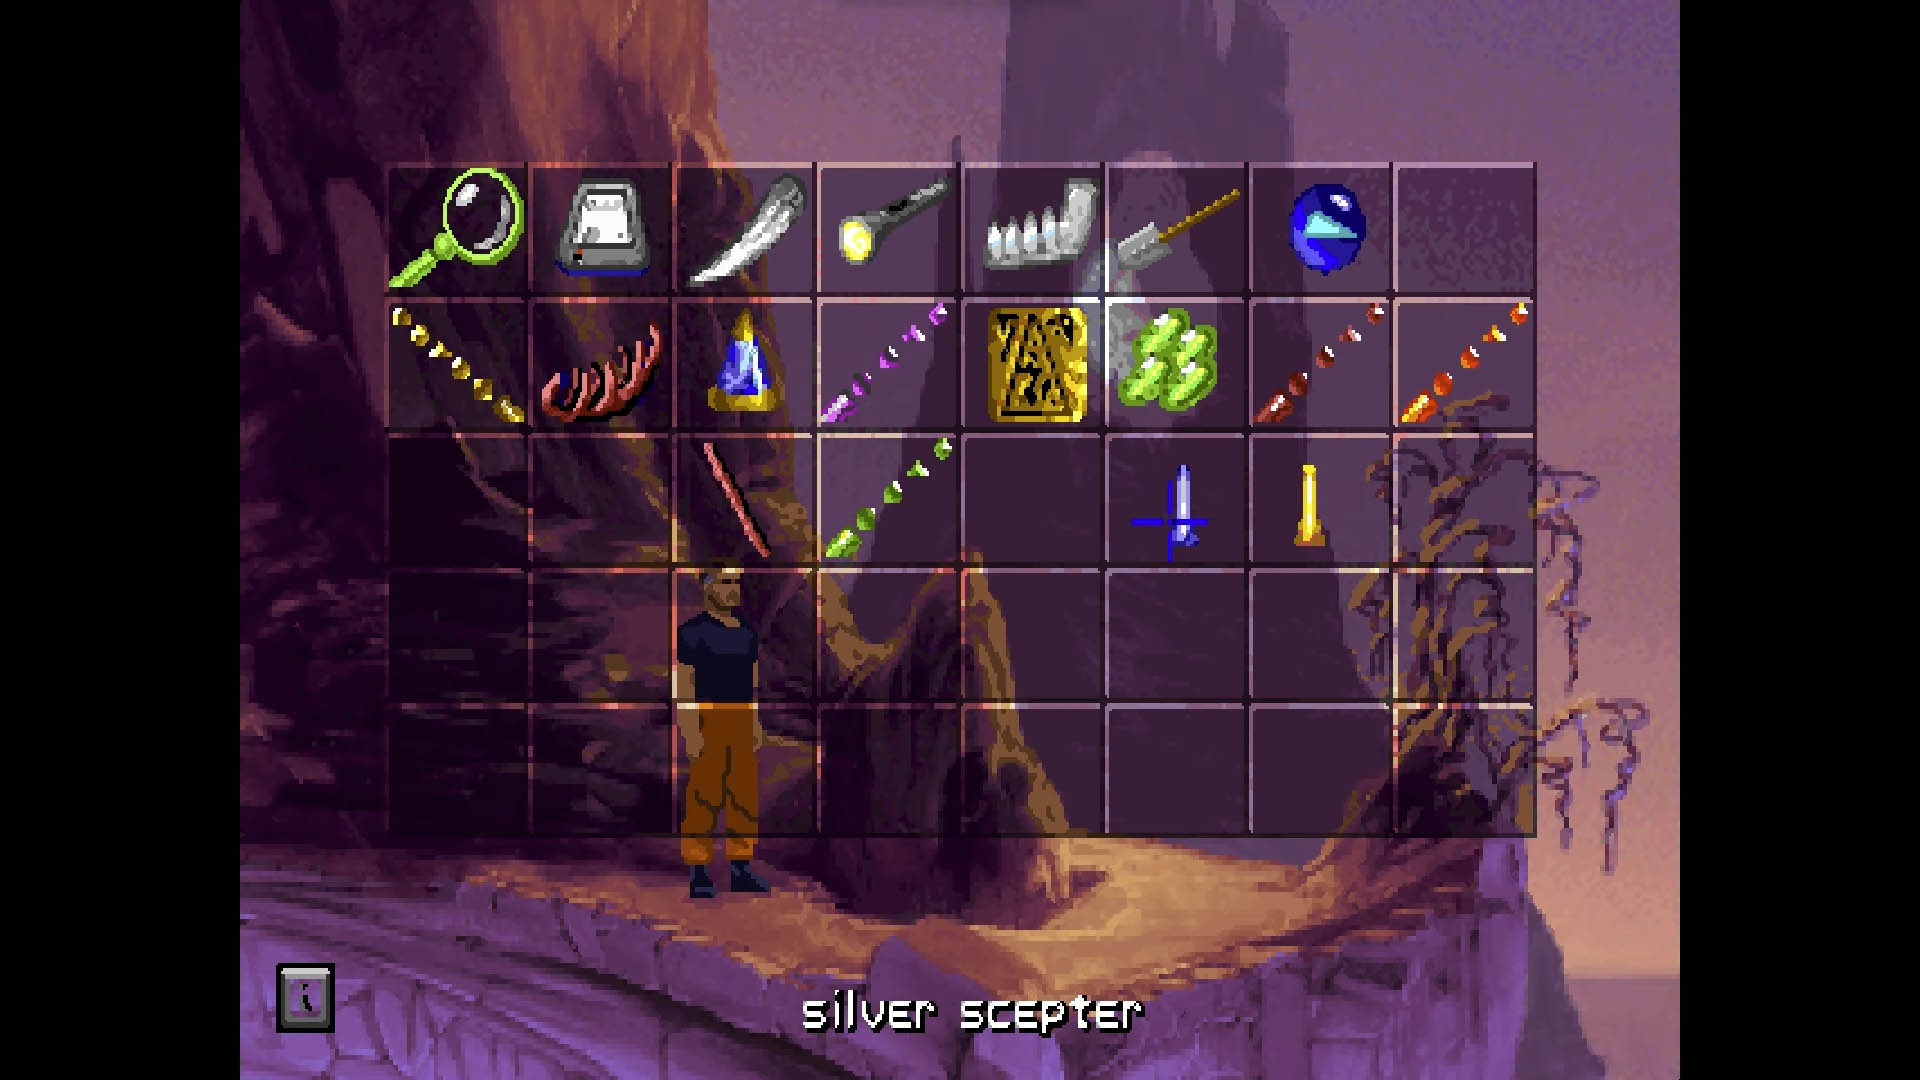 A gameplay screenshot from Dig